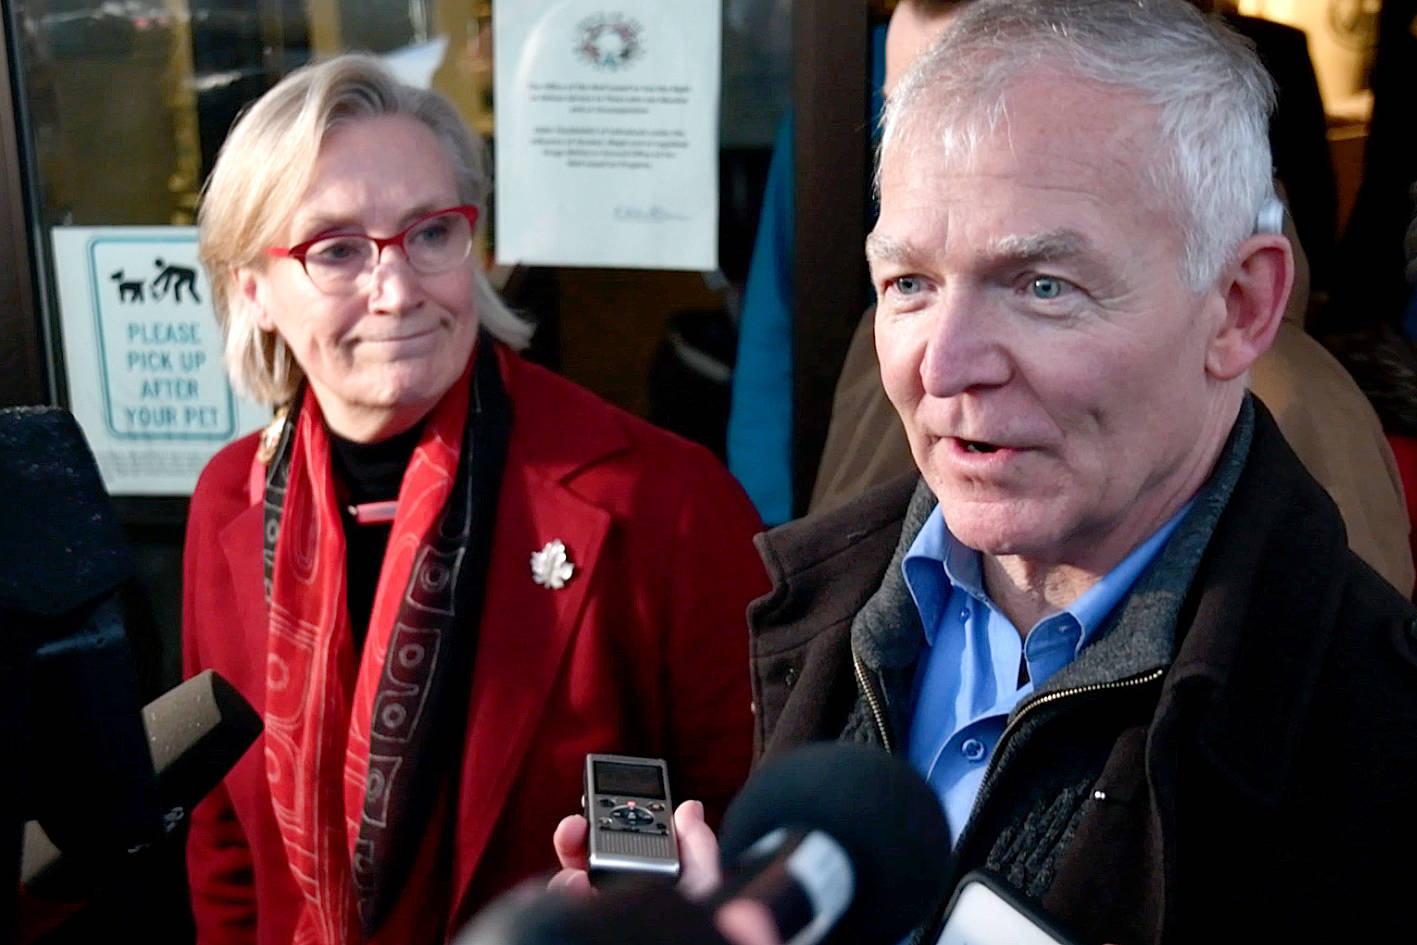 B.C. Indigenous Relations Minister Scott Fraser and Crown-Indigenous Relations Minister Carolyn Bennett speak briefly to the press following Thursday’s discussions with the Wet’suwet’en hereditary chiefs. (Quinn Bender photo)